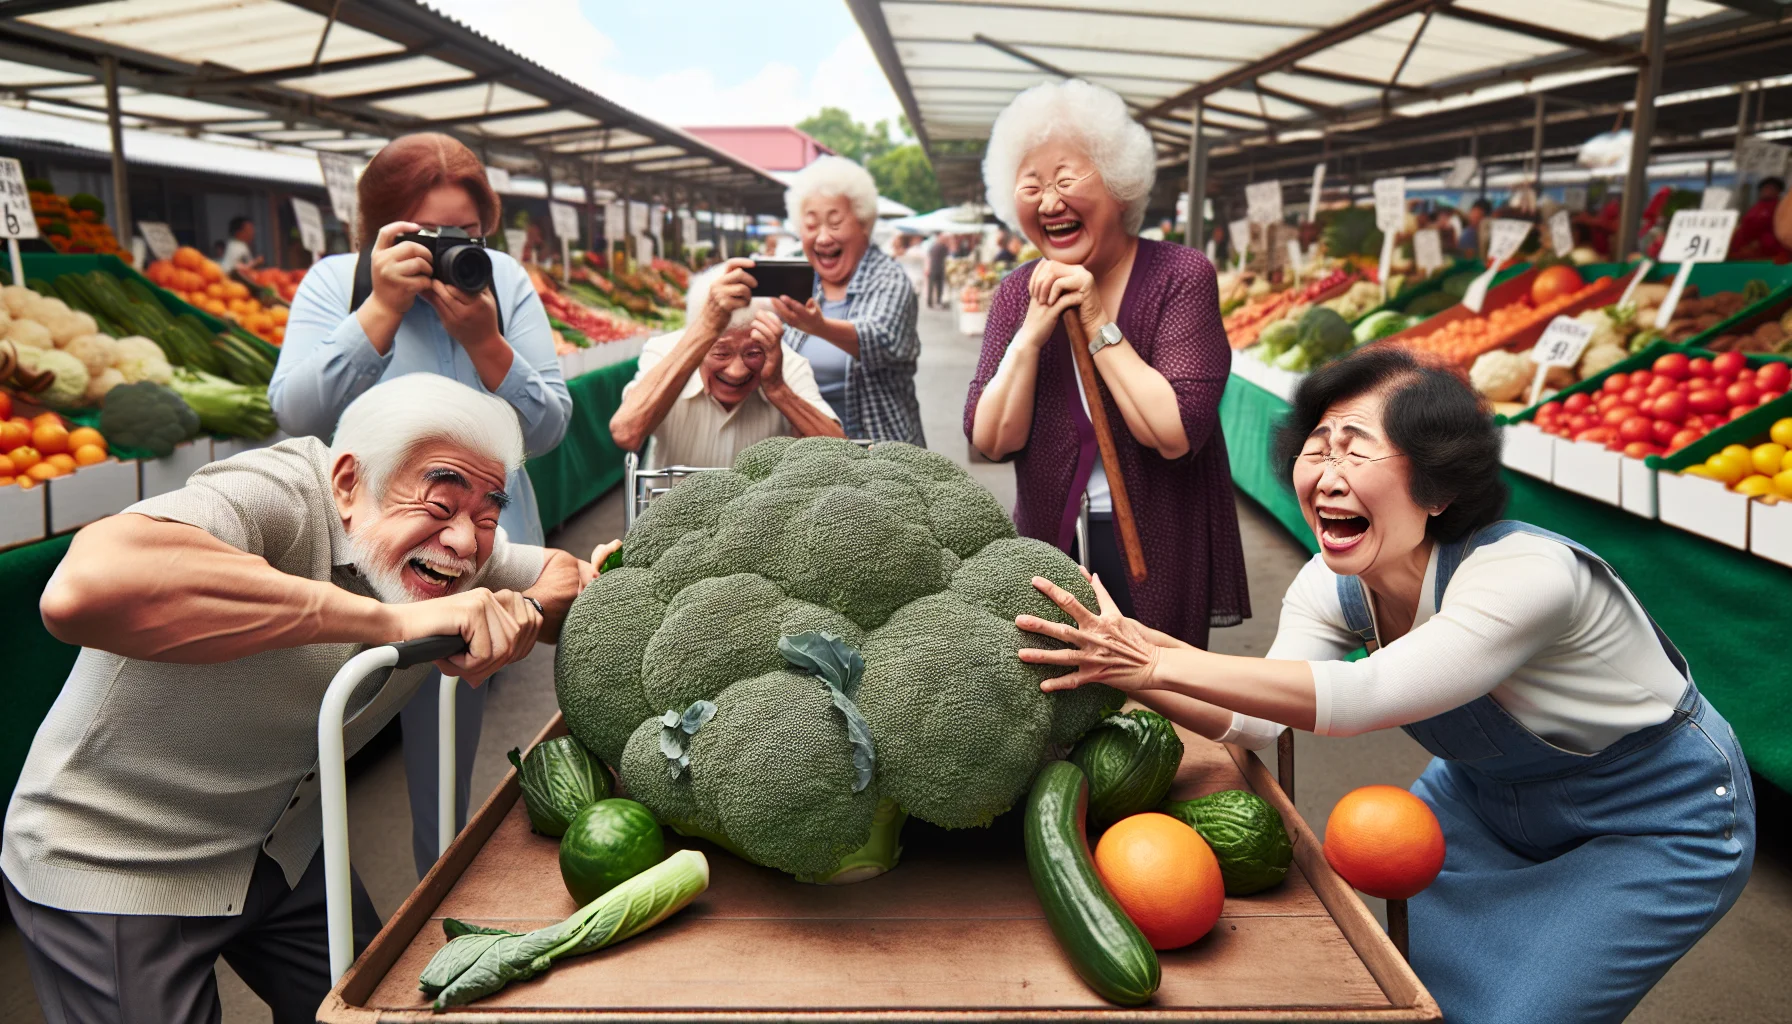 Create an amusing and realistic image featuring an elderly Caucasian man and Asian woman in their sixties. They are chuckling while at a farmers market, analyzing gigantic versions of fruits and vegetables known for their high vitamin content. They are using walking sticks as measure for scale. On another stall, Black and Middle-eastern senior women are trying to move a massive broccoli as if it was a weight lifting competition. All around, Hispanic seniors are snapping photos, enjoying the humor in the spectacle. Emphasize that this is a light-hearted scene, promoting the idea of eating fresh, healthy foods for better nutrition in their age group.